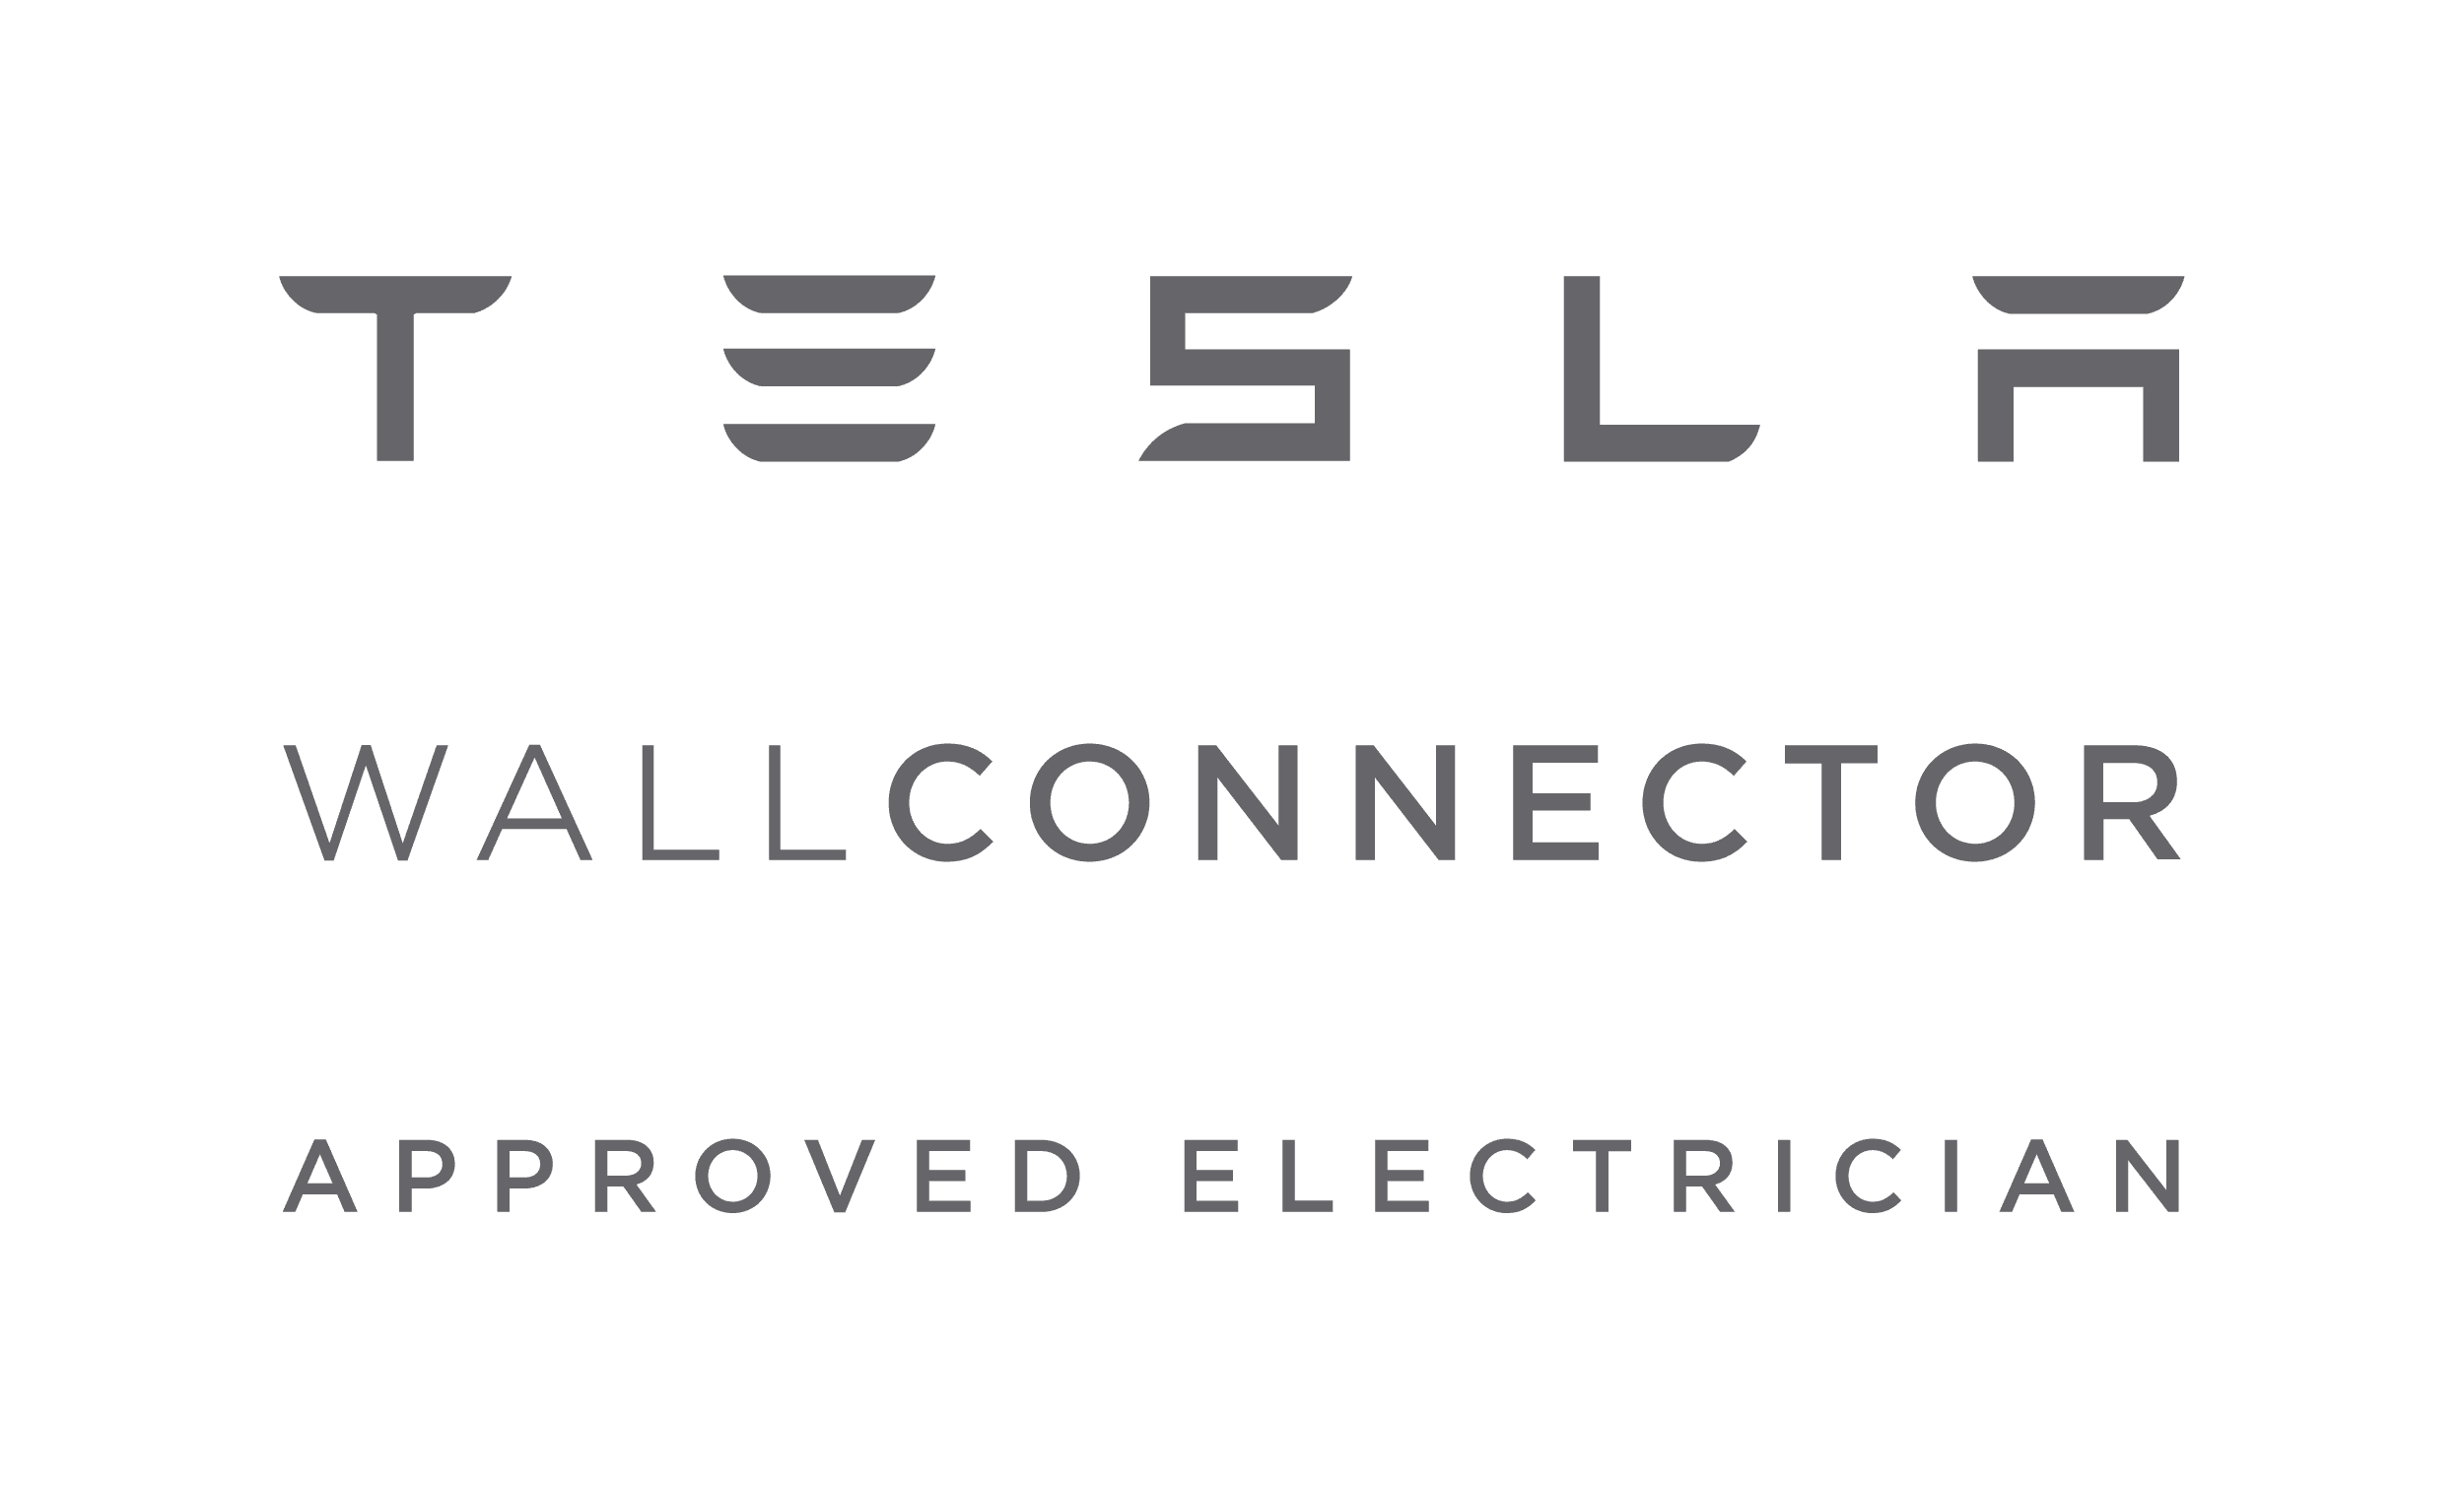 Tesla Wall Connector Approved Electrician